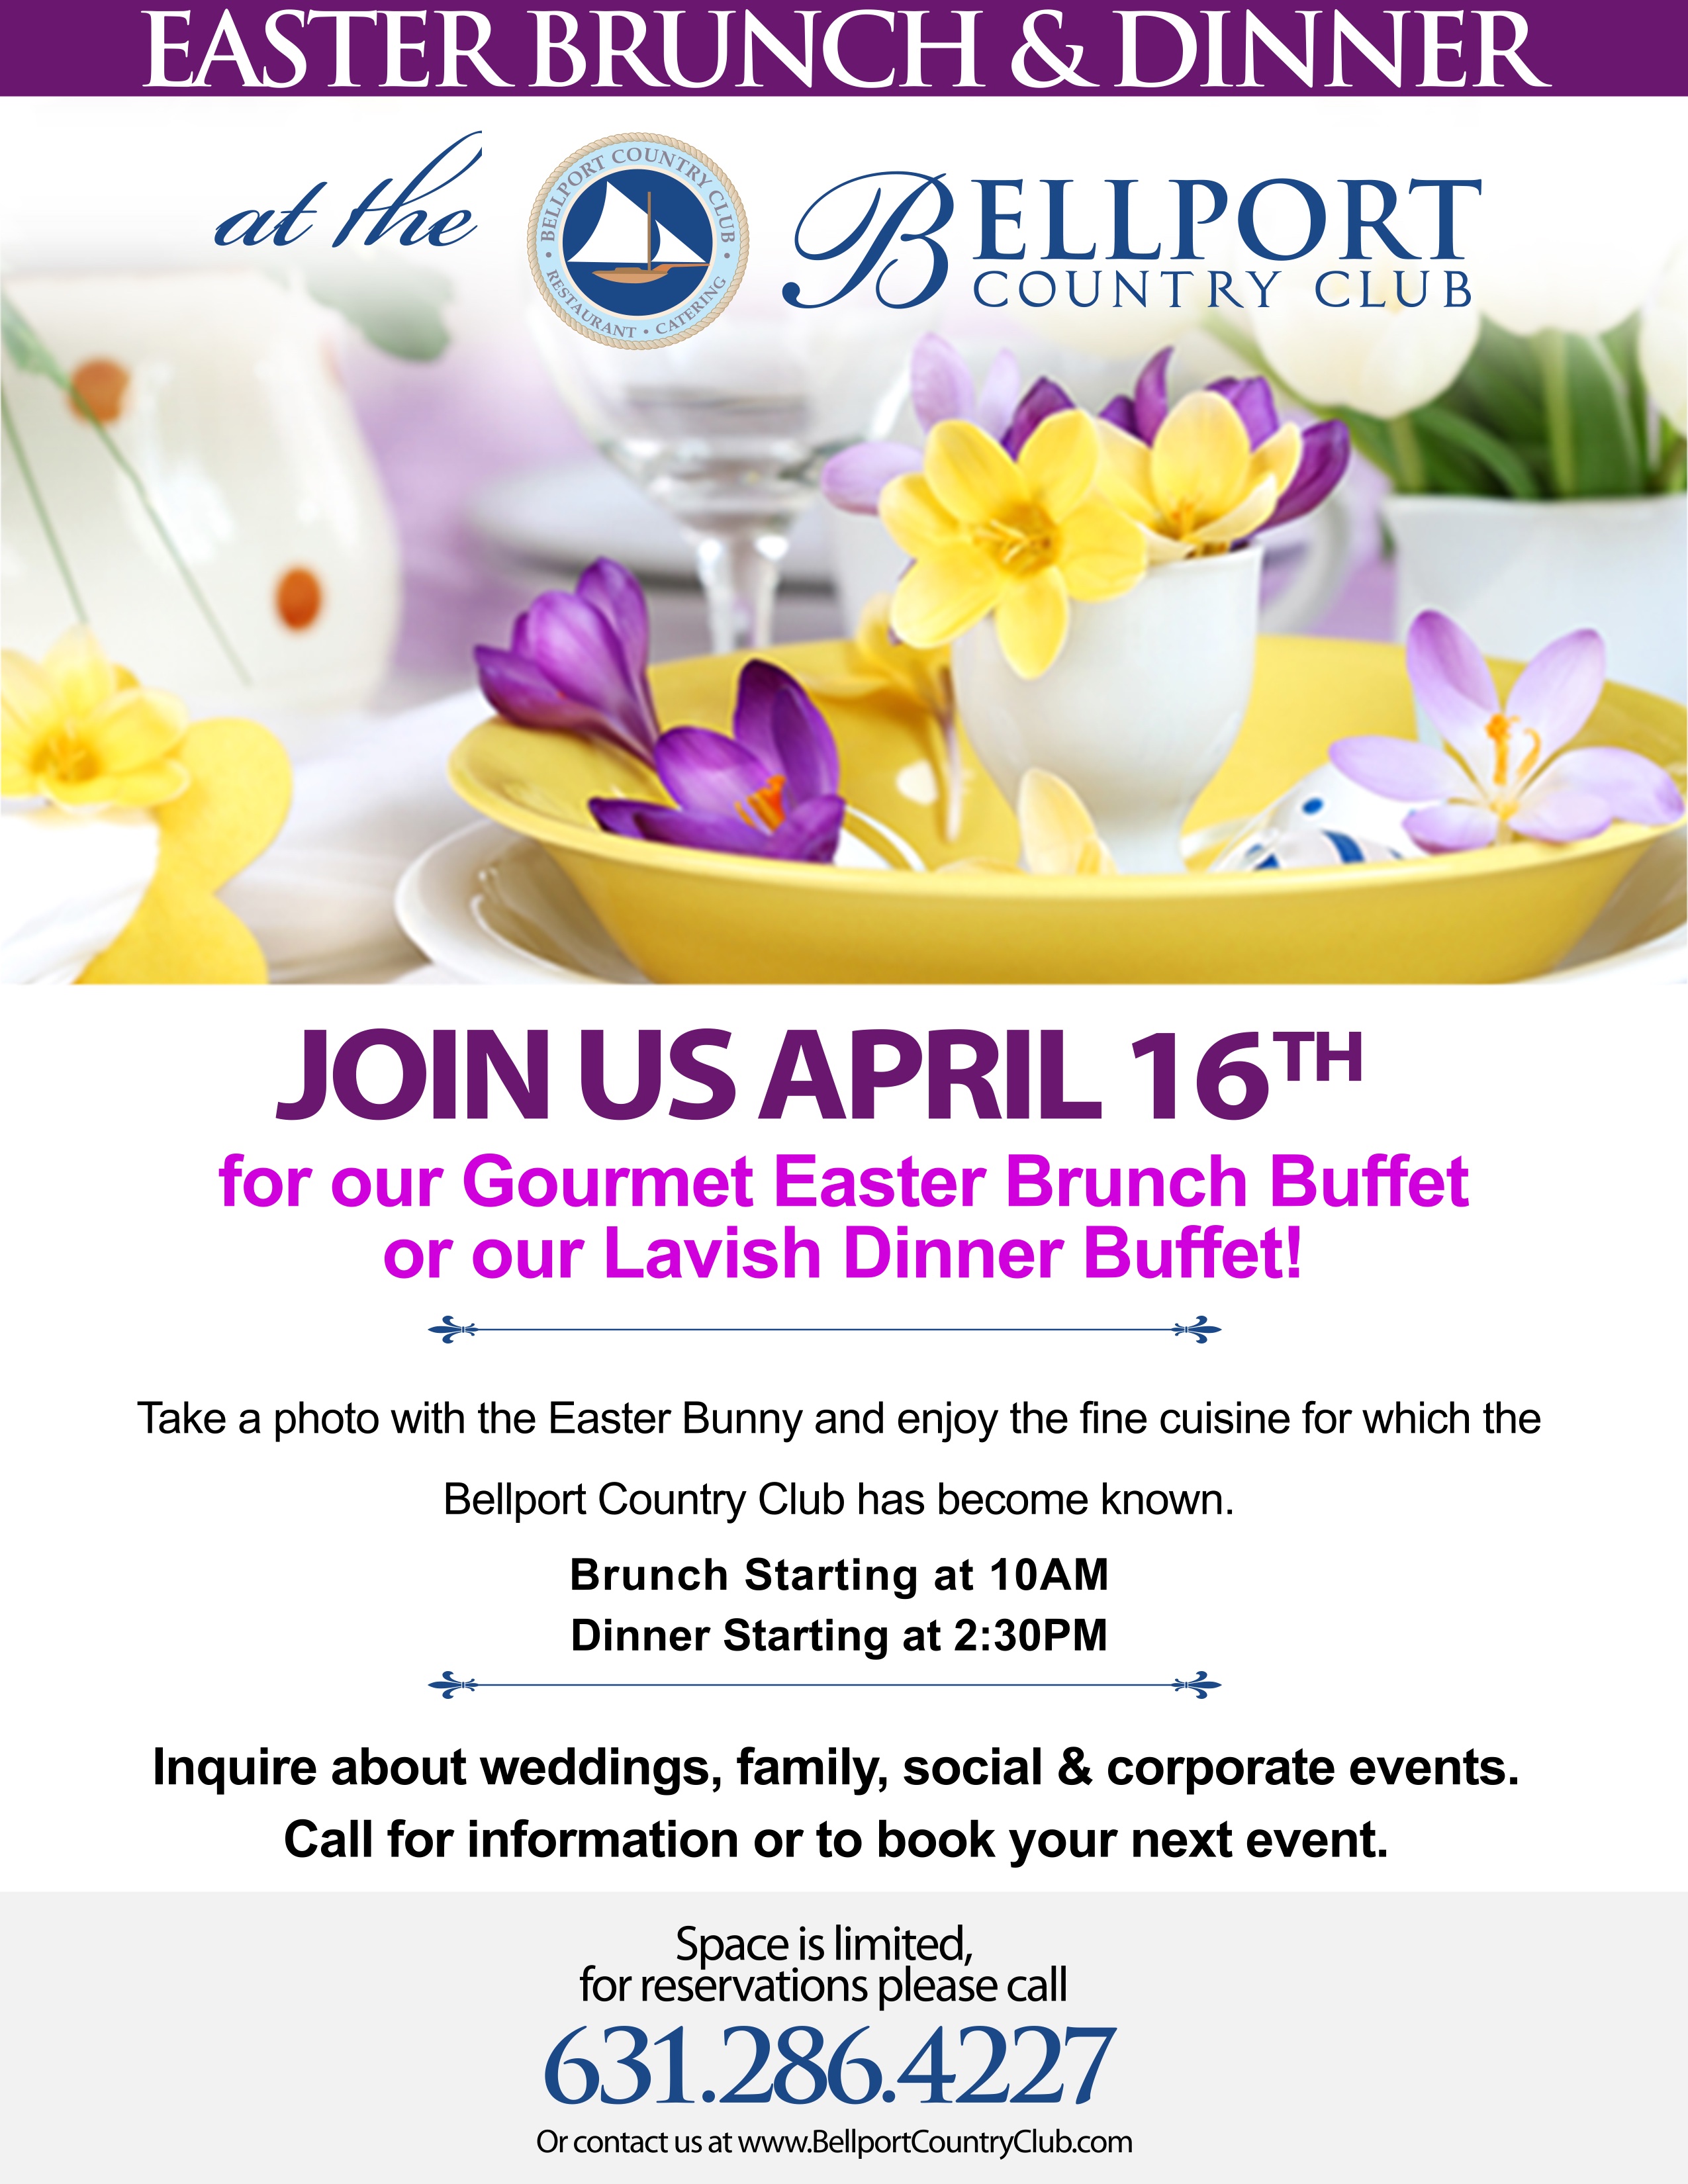 Easter Brunch and Dinner Buffet Bellport Country Club